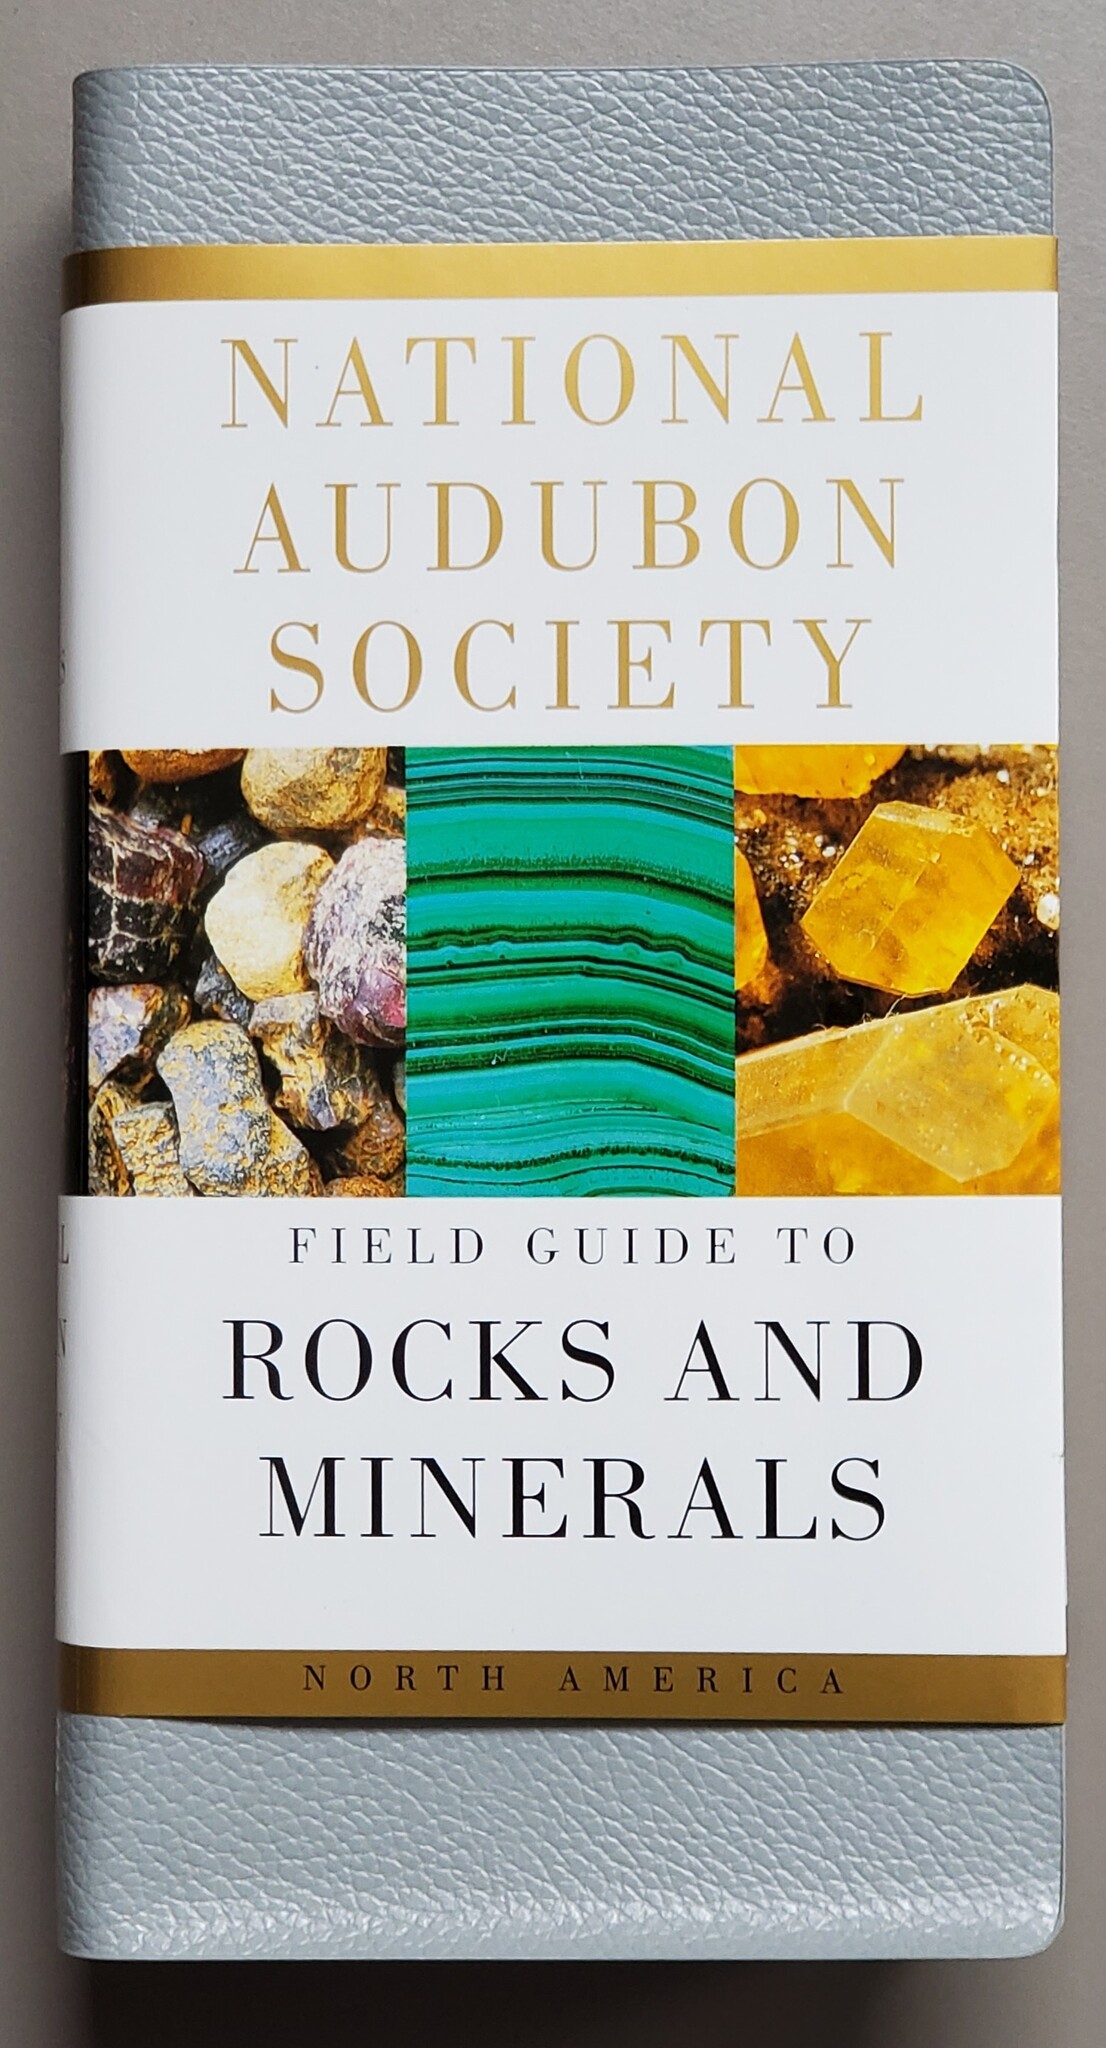 National Audubon Society: Field Guide to North American Rocks and Minerals